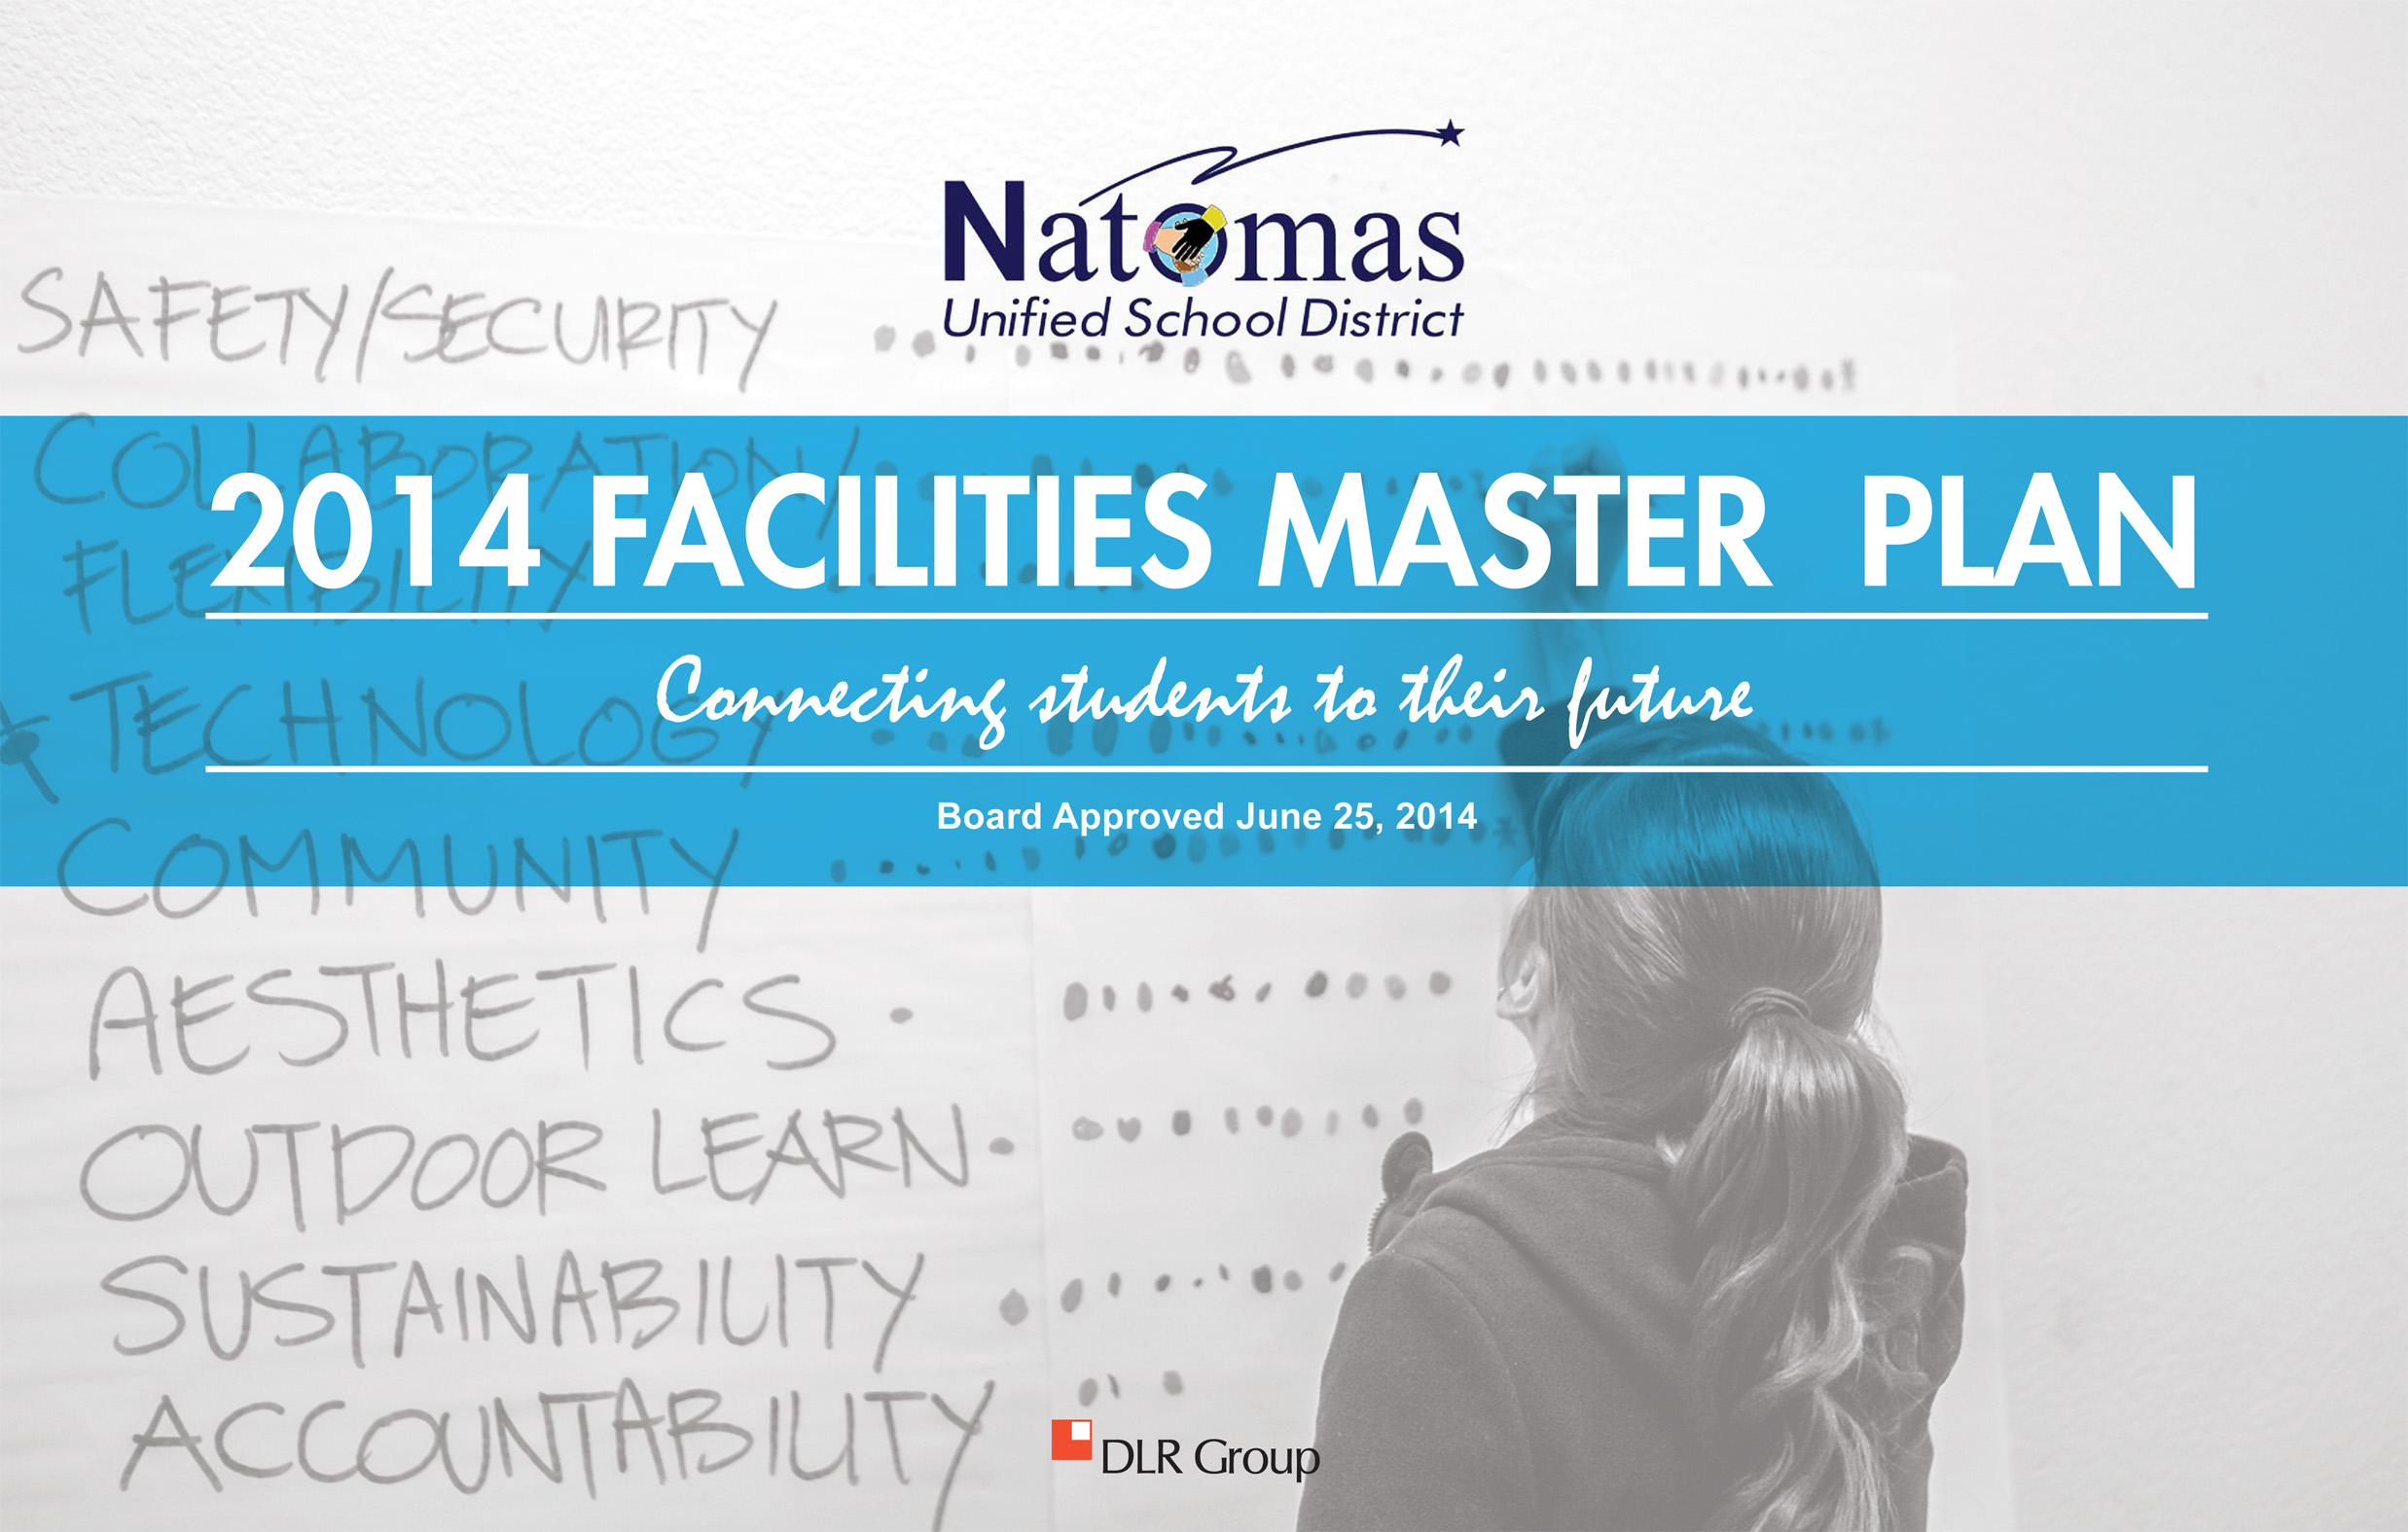 Link to 2014 Facilities Master Plan